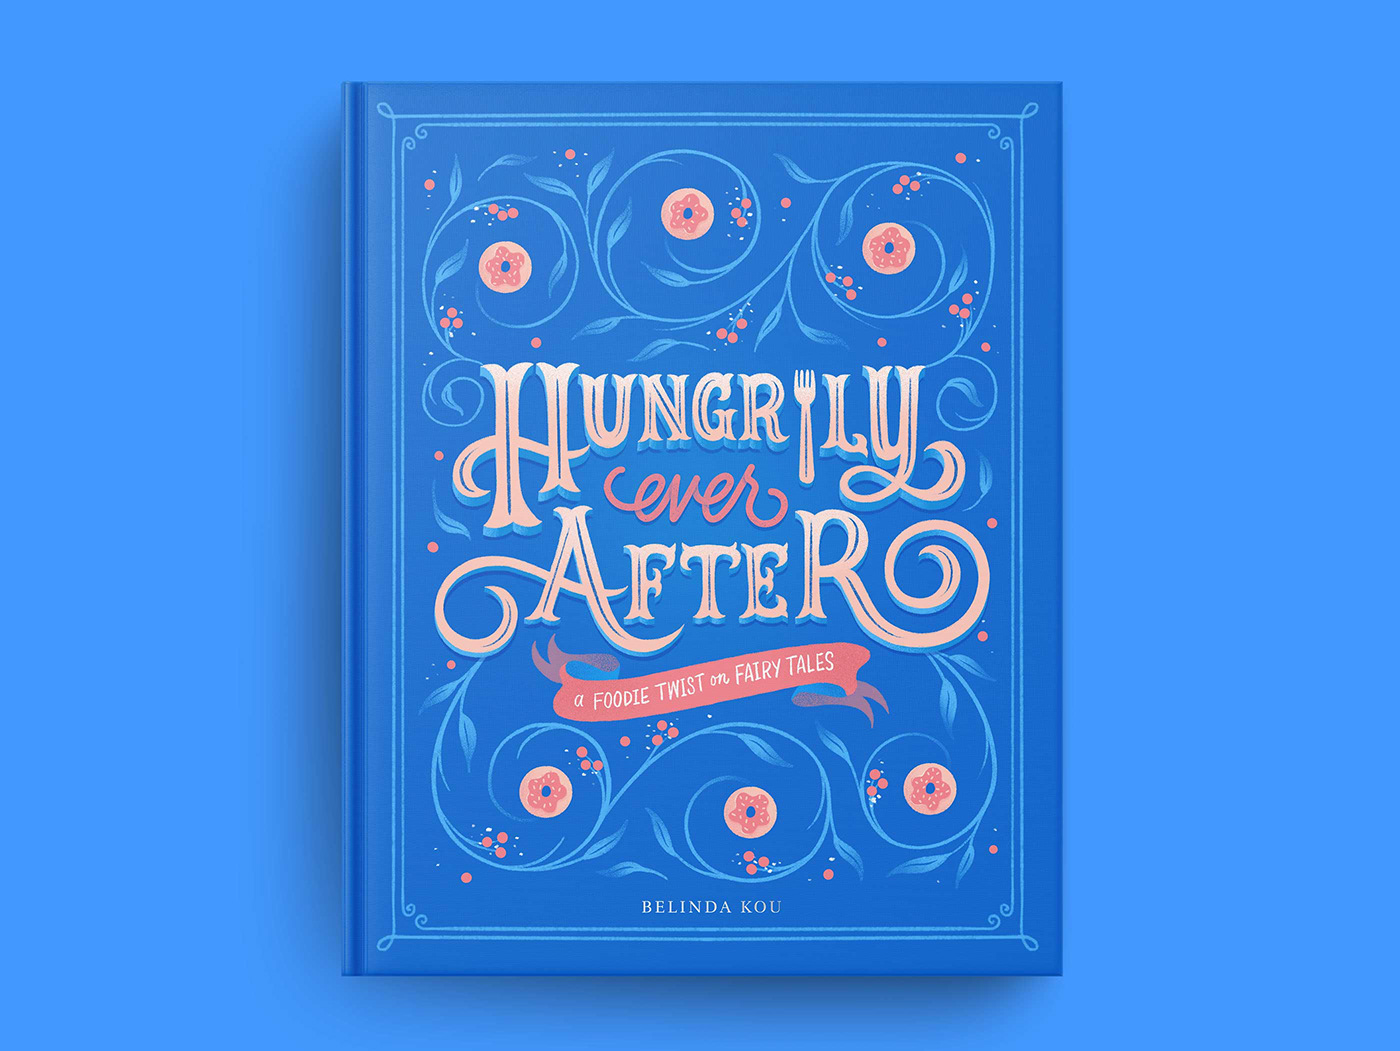 Book cover art featuring hand lettering and illustrations of fairy tale and food art